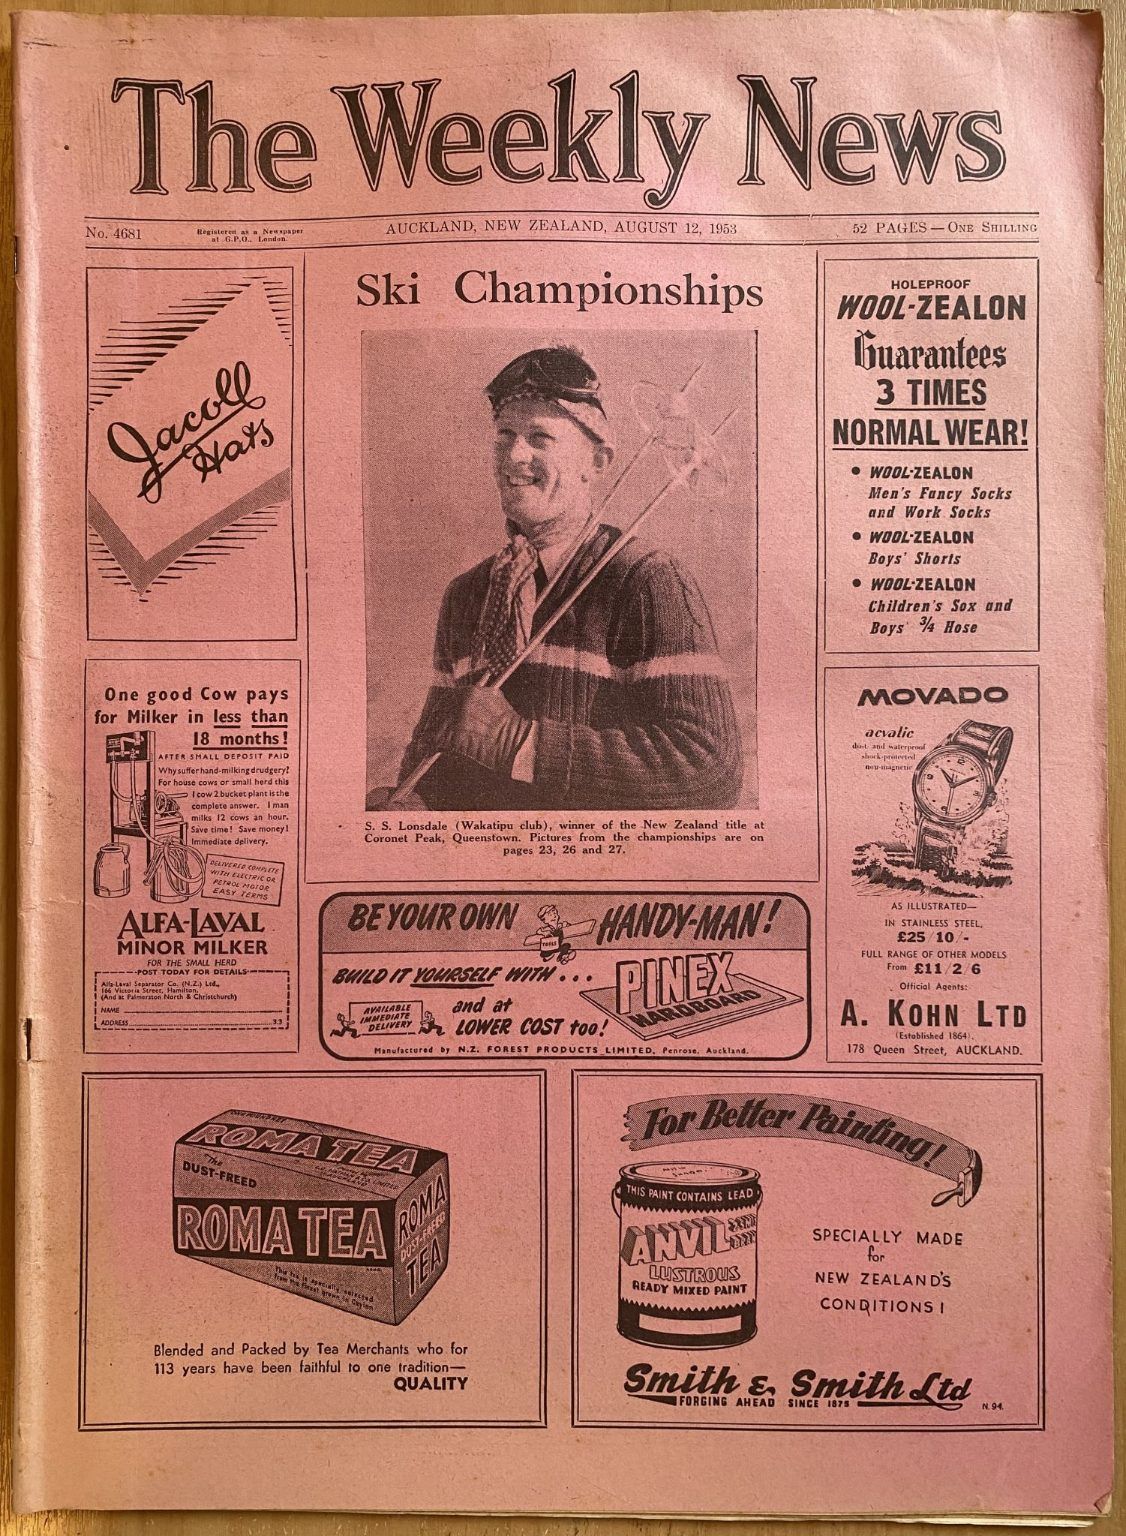 OLD NEWSPAPER: The Weekly News - No. 4681, 12 August 1953